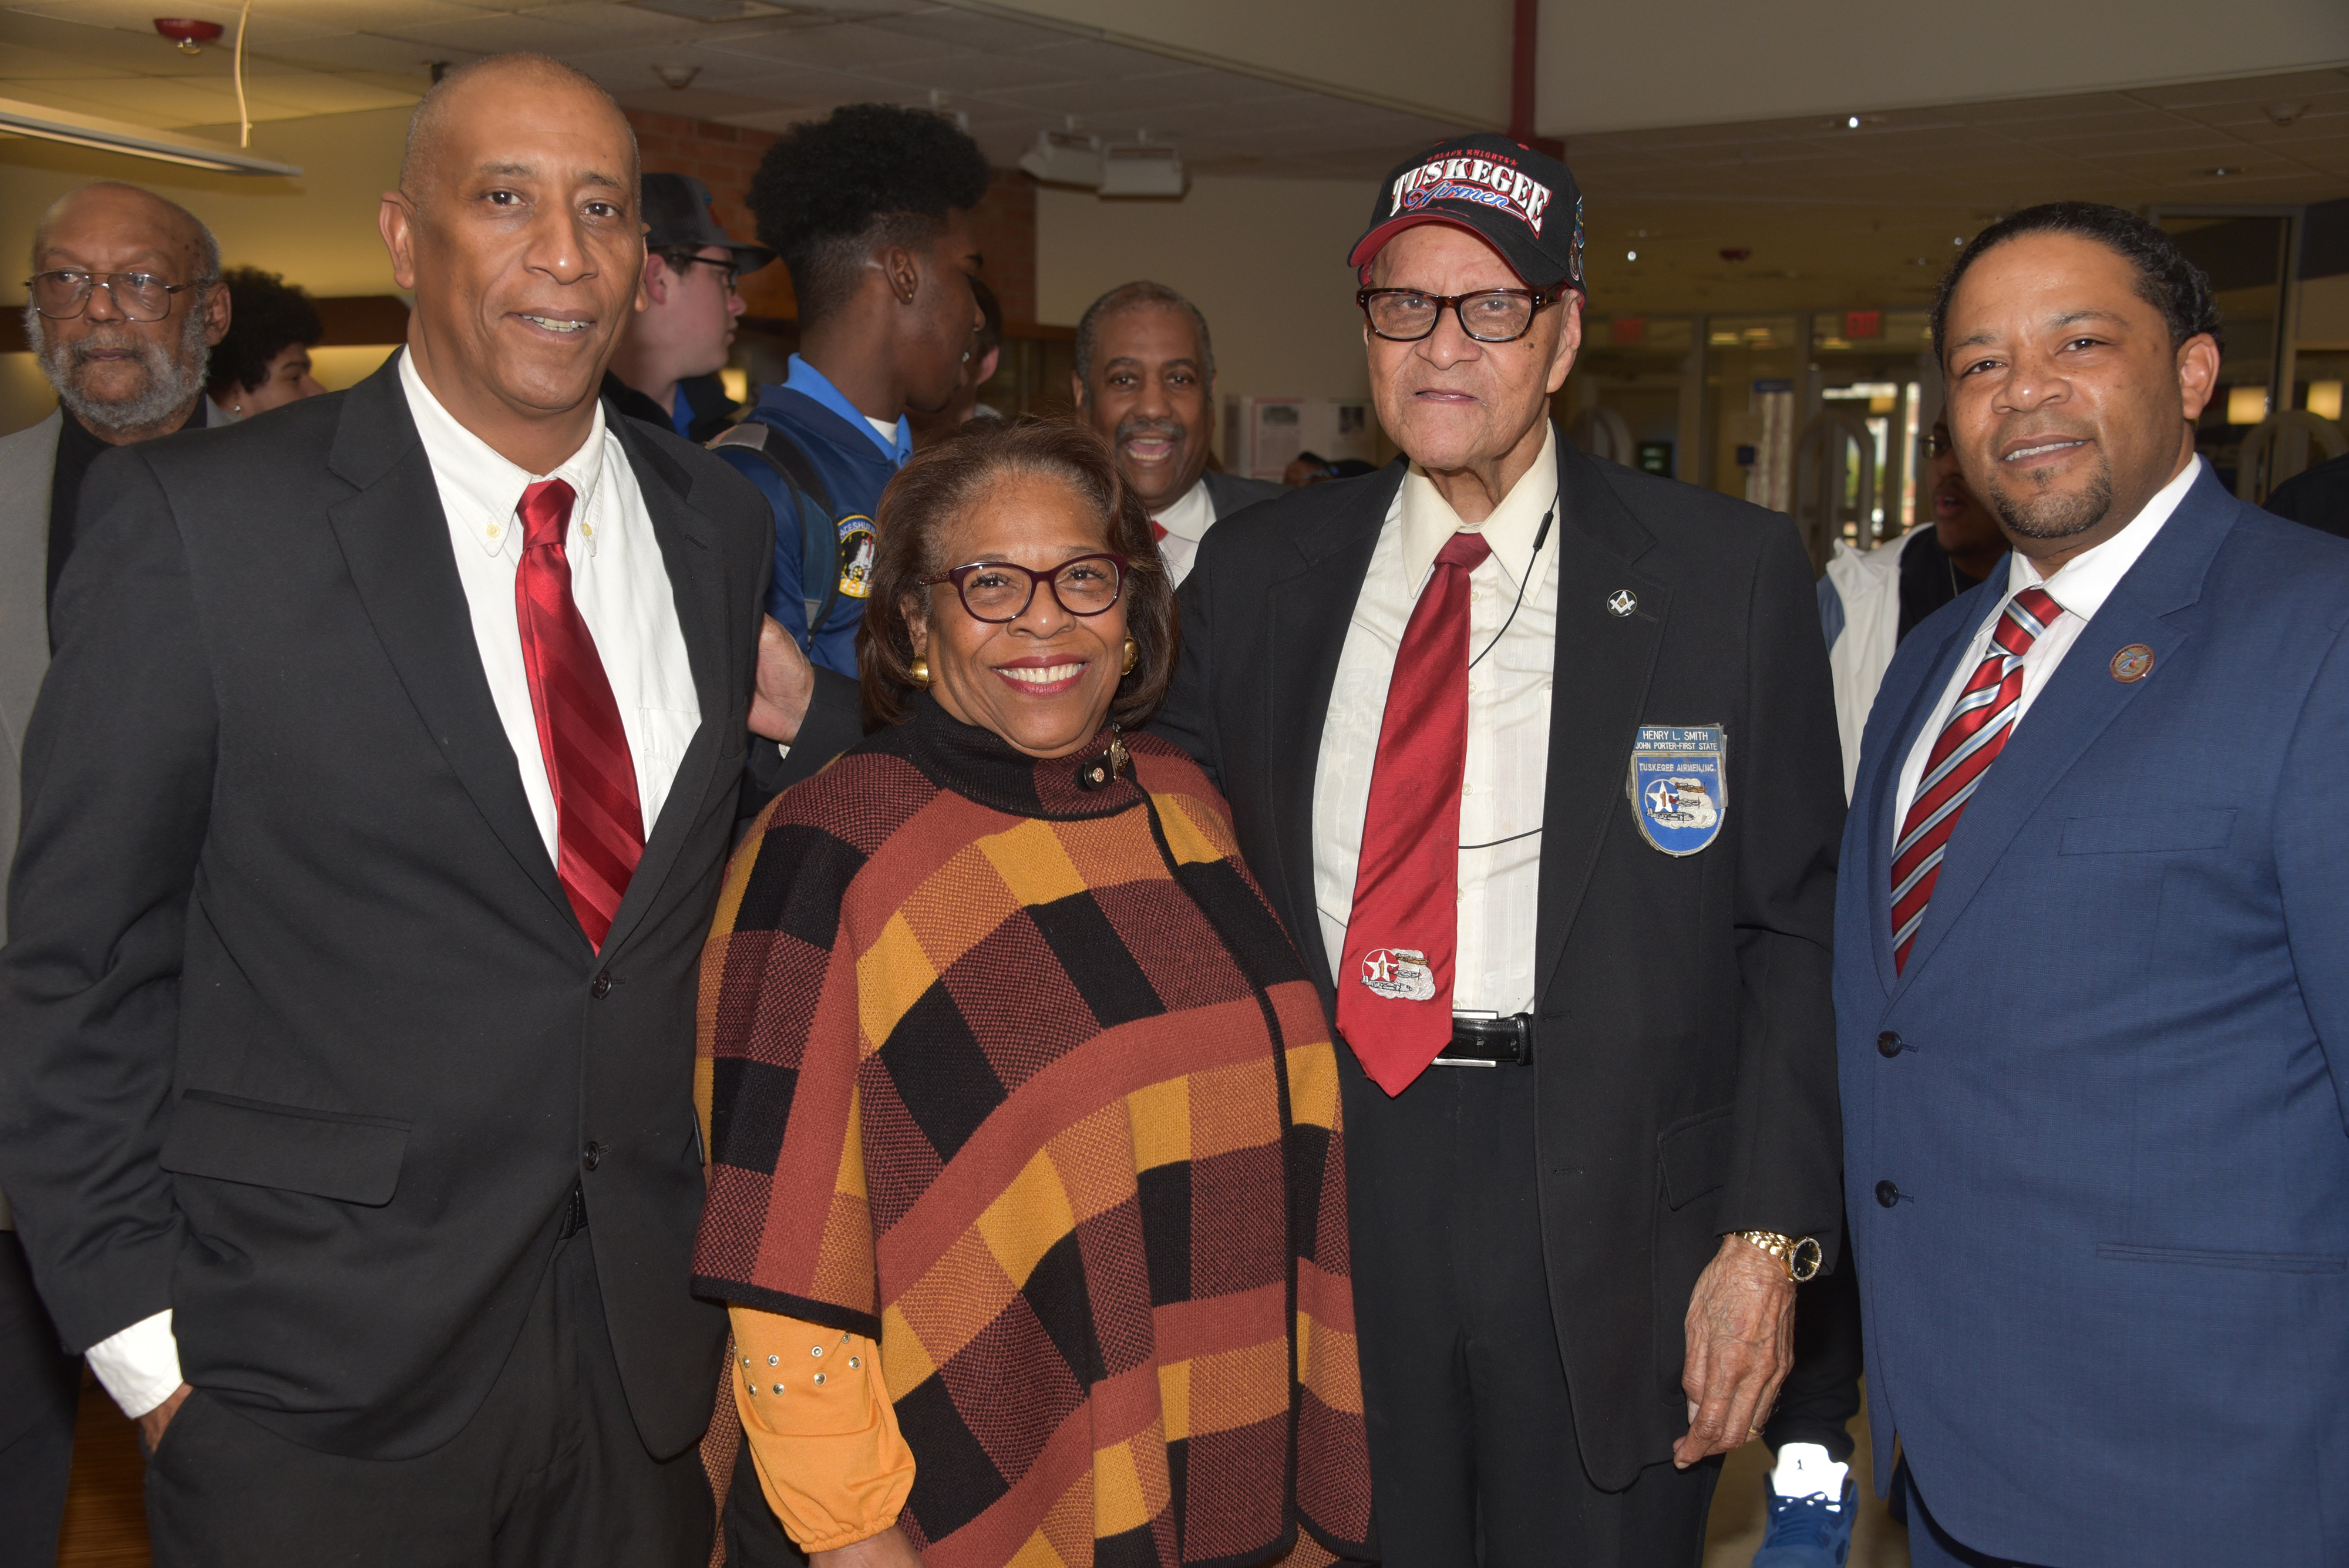 (L-r) Steven Smith, Dr. Wilma Mishoe, Henry Smith, and Travis Mishoe pose for a photo. Henry Smith talked about his time as a Tuskegee Airman during a program at the William C. Jason Library.